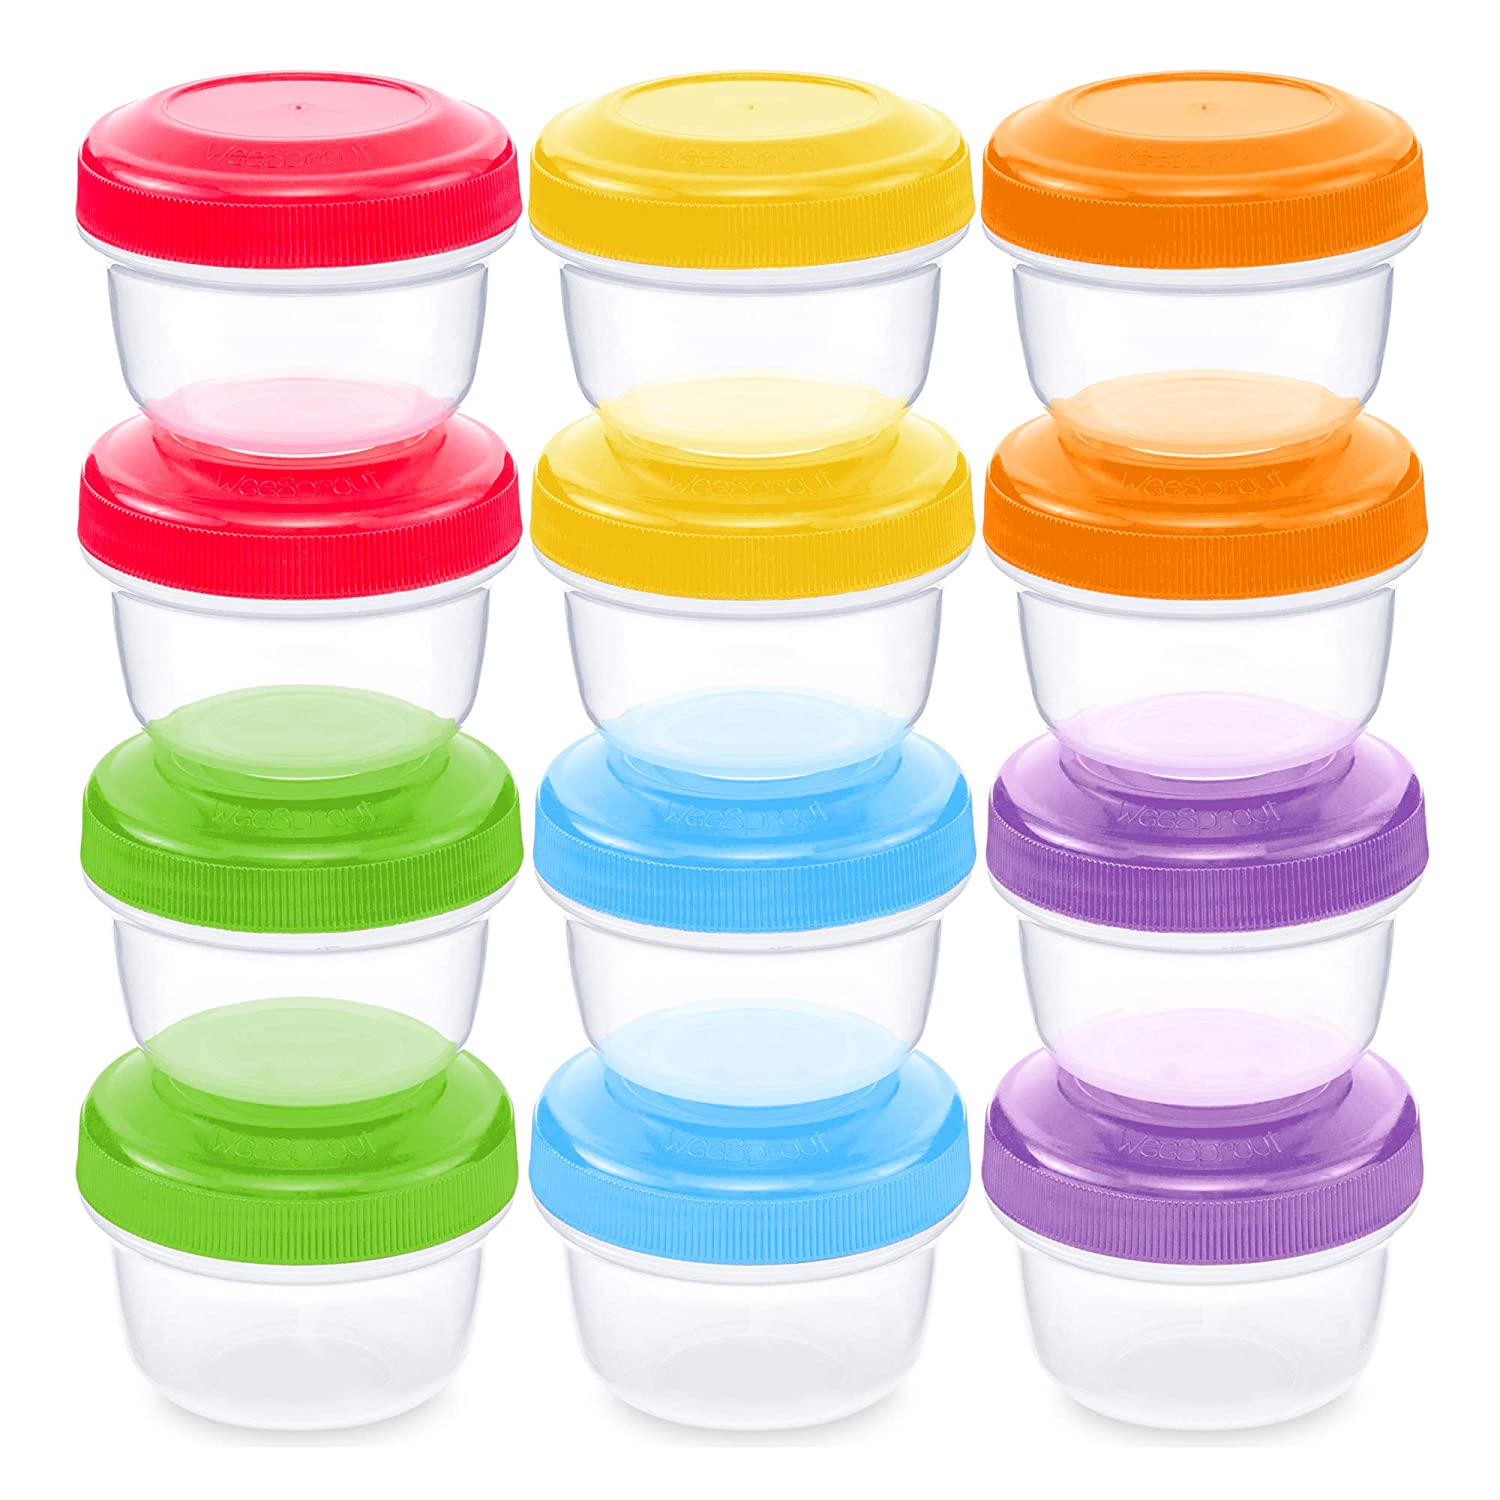 WEESPROUT Reusable Baby Food Freezer Containers, 12-Pack